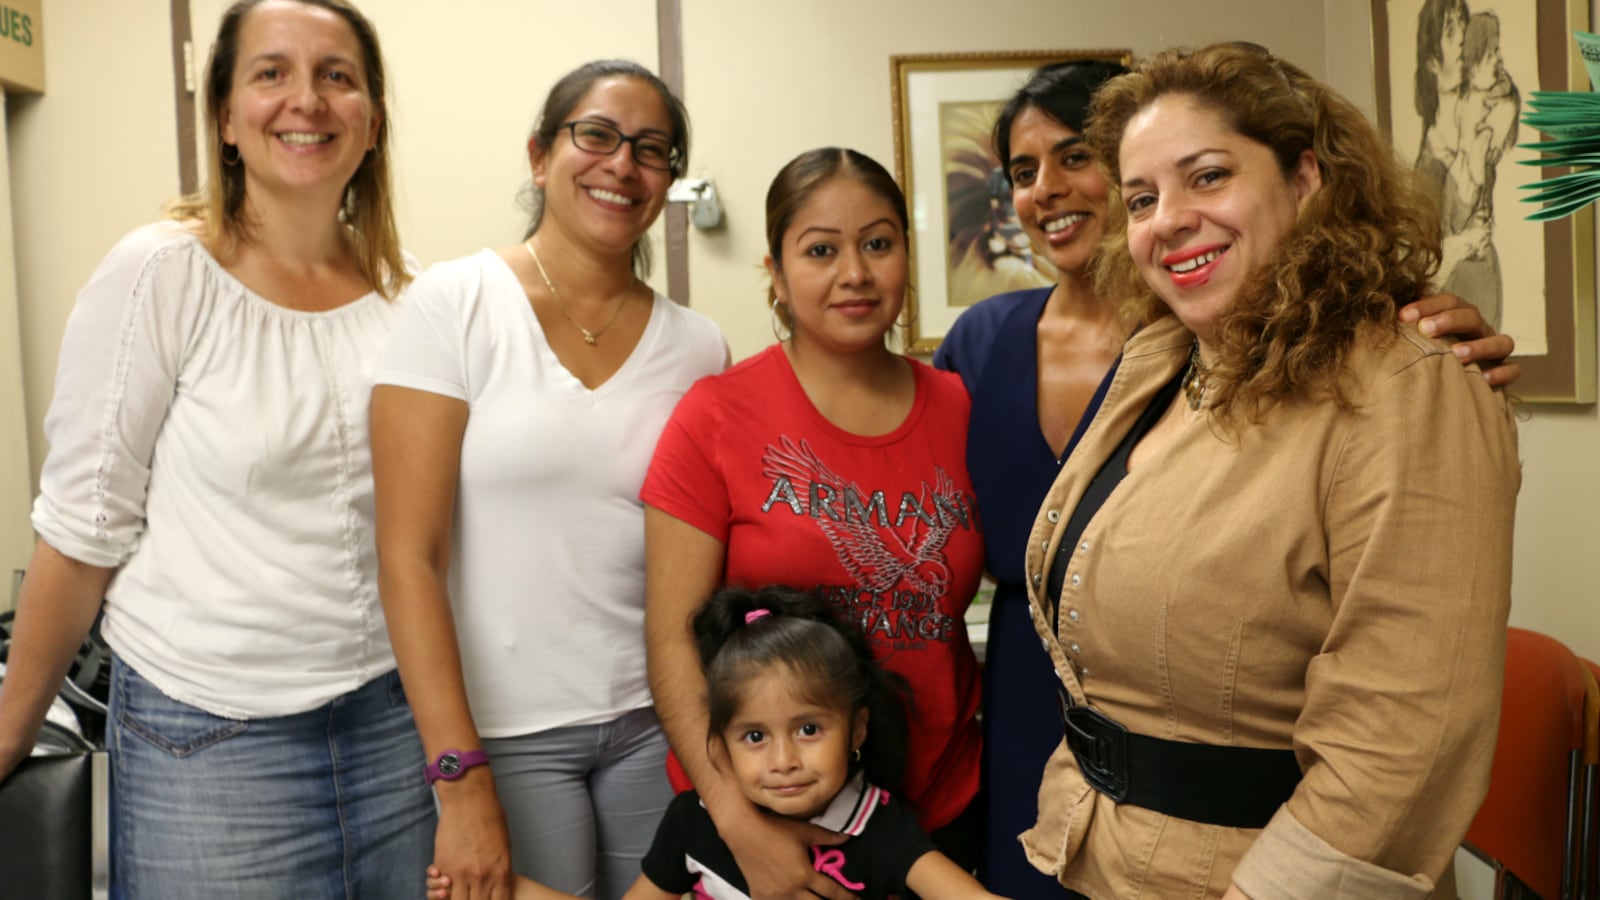 Members of the District 3 Equity in Education Task Force and the Parent Leadership Project. From left: Lori Falchi, Flor Donoso, Claudia Ortega and her daughter Sophia, Ujju Aggarwal, and Mariela Angulo.